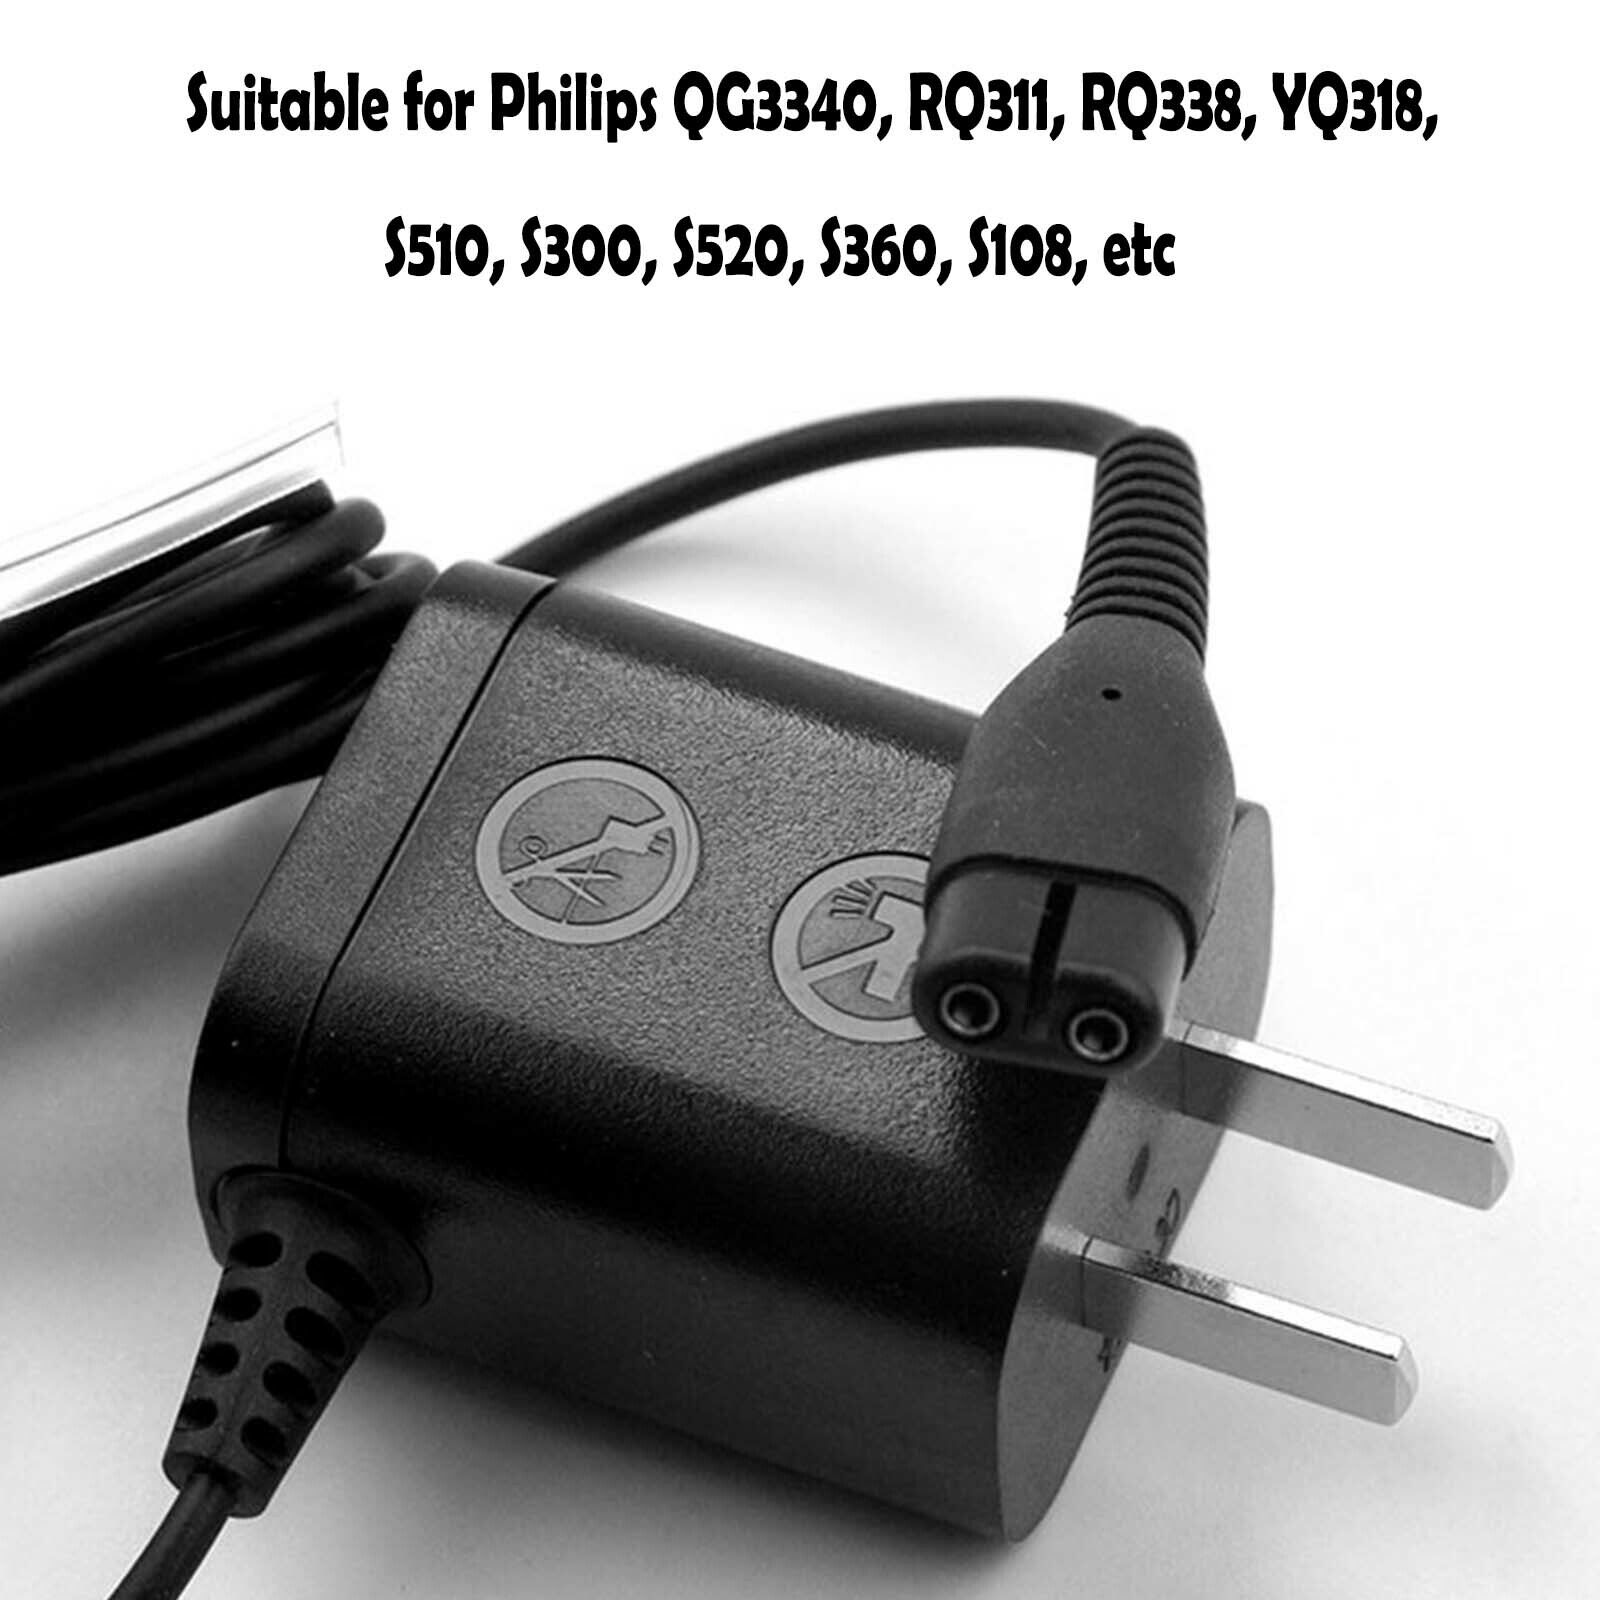 US Plug Power Cord Adapter A00390 for QP2520 S528 S526 S529 Shaver Repair Parts Description: High quality chip, safer - Click Image to Close